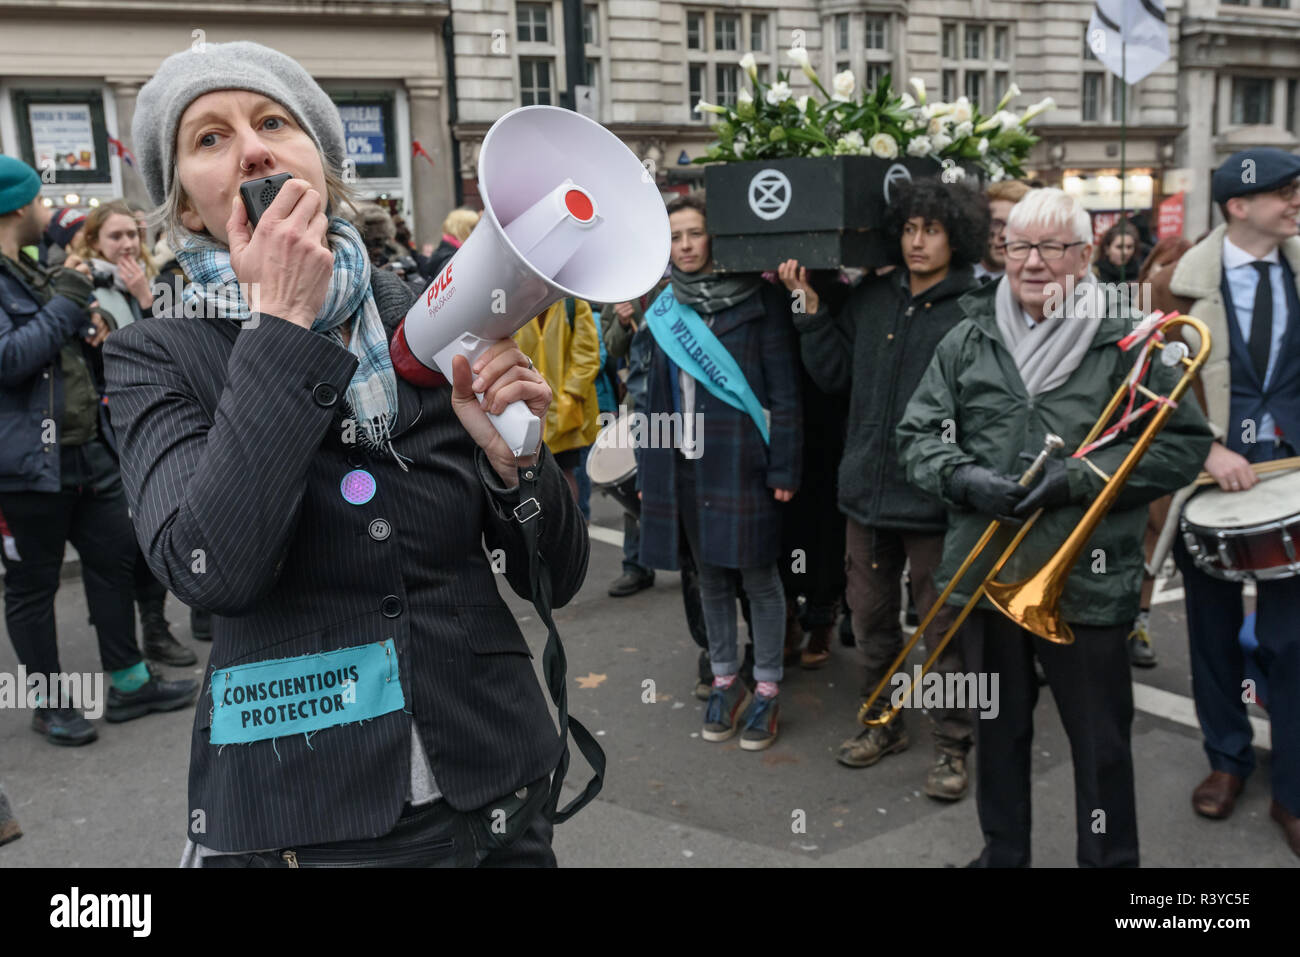 London, UK. 24th November 2018. Gail Bradbrook speaks as the Extinction Rebellion funeral procession pauses in Whitehall to allo everyone to catch up. She tells them that they are going to walk down The Mall on their way to Buckingham Palace. A few officers made a half-hearted attempt to stop them, but were called off and the procession went on its intended way. emorial. Peter Marshall/Alamy Live News Stock Photo